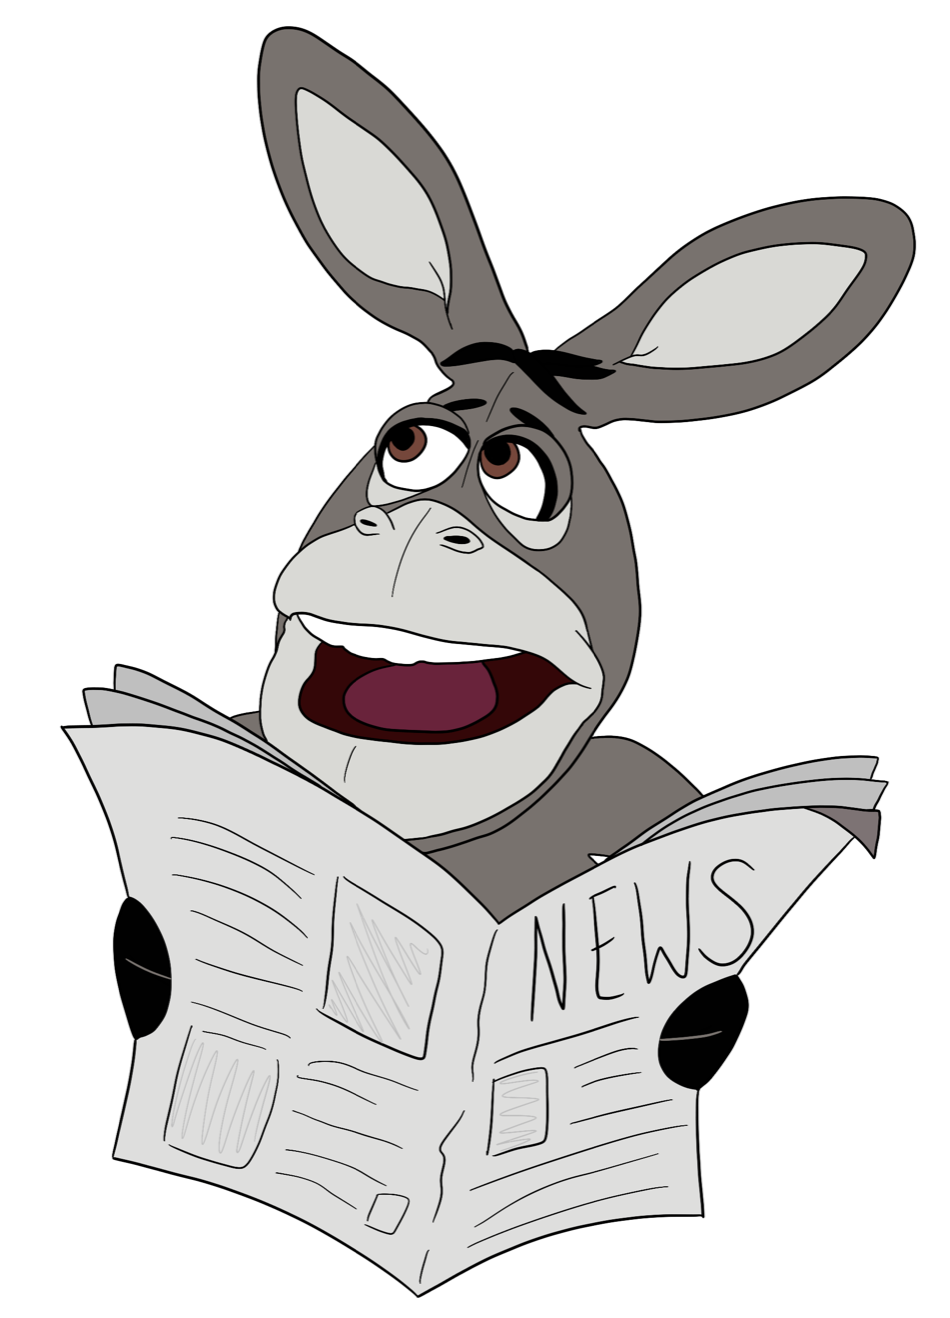 Image of Hoté the Jackass Letters mascot reading a newspaper.